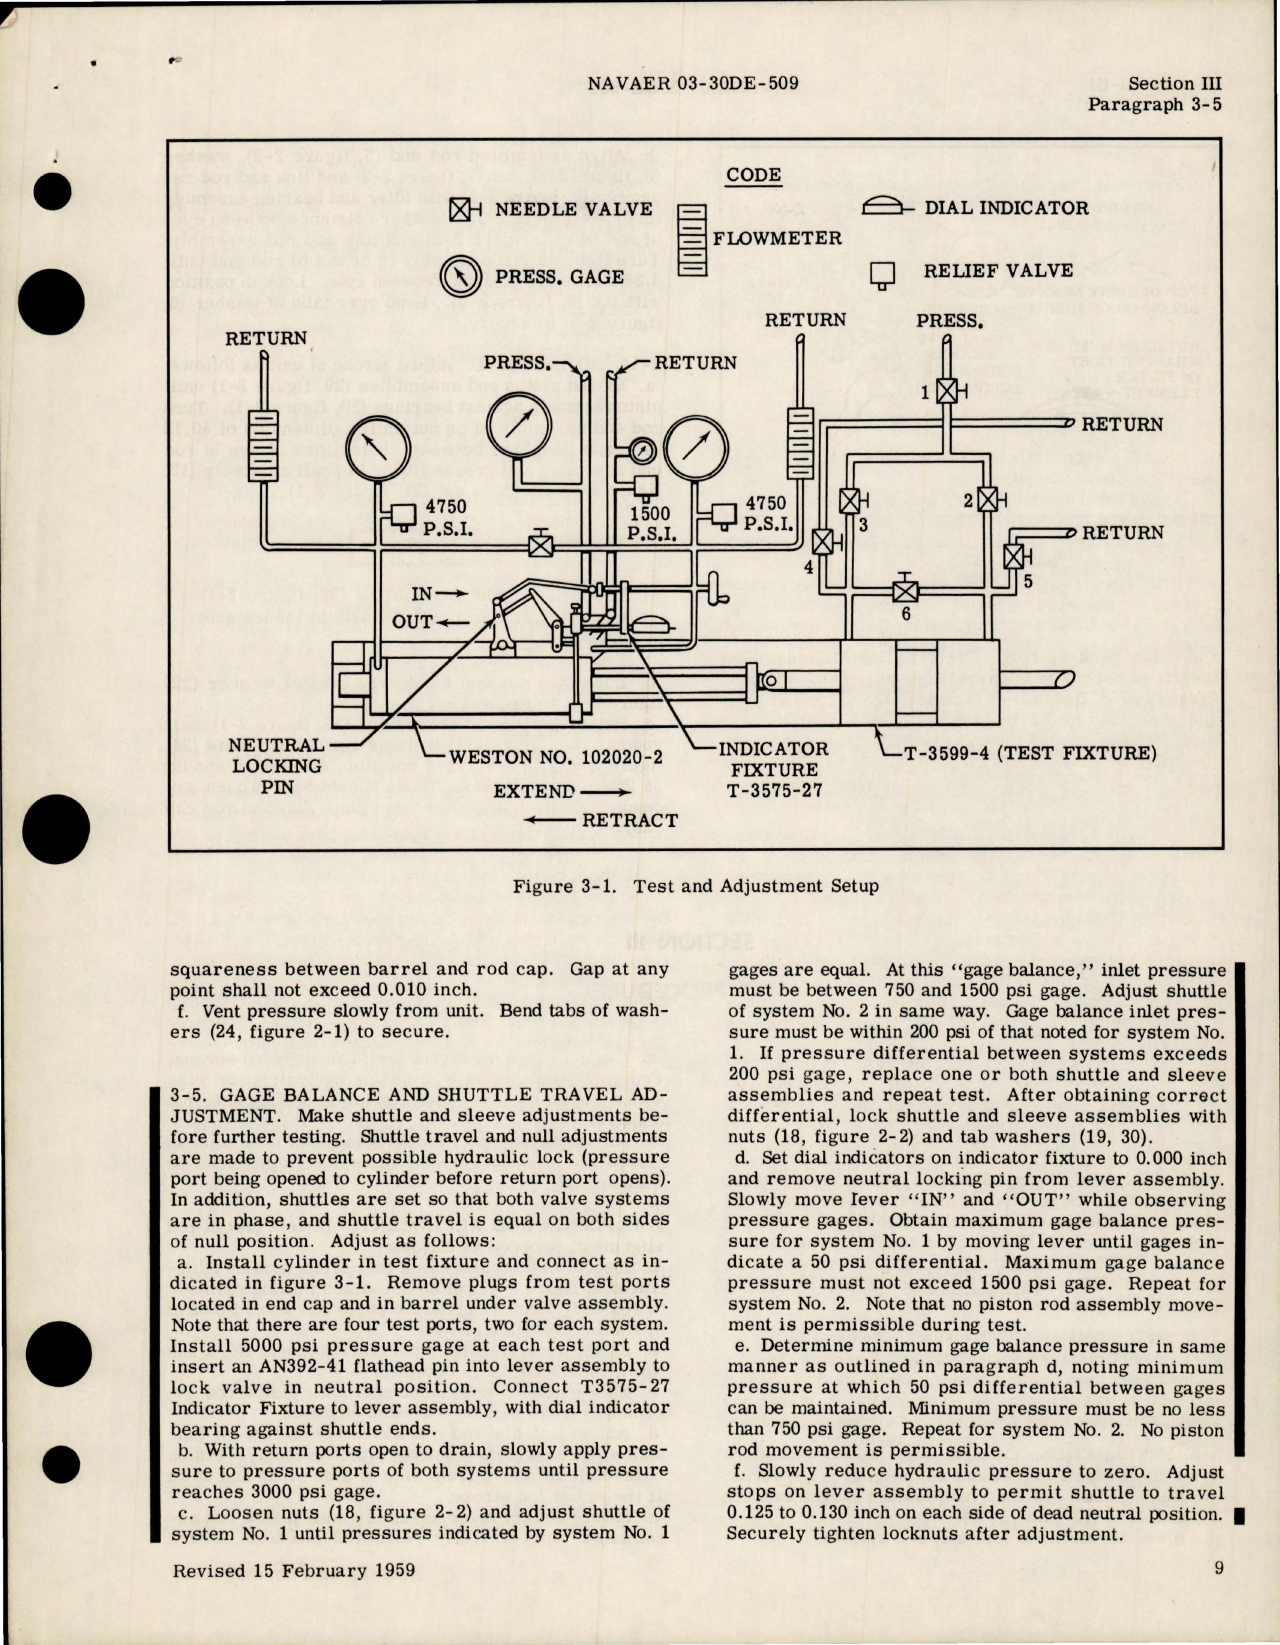 Sample page 7 from AirCorps Library document: Overhaul Instructions for Stabilizer Control Power Cylinders - Parts 12020-2, 12490-1, 12490-2, 12490-3 